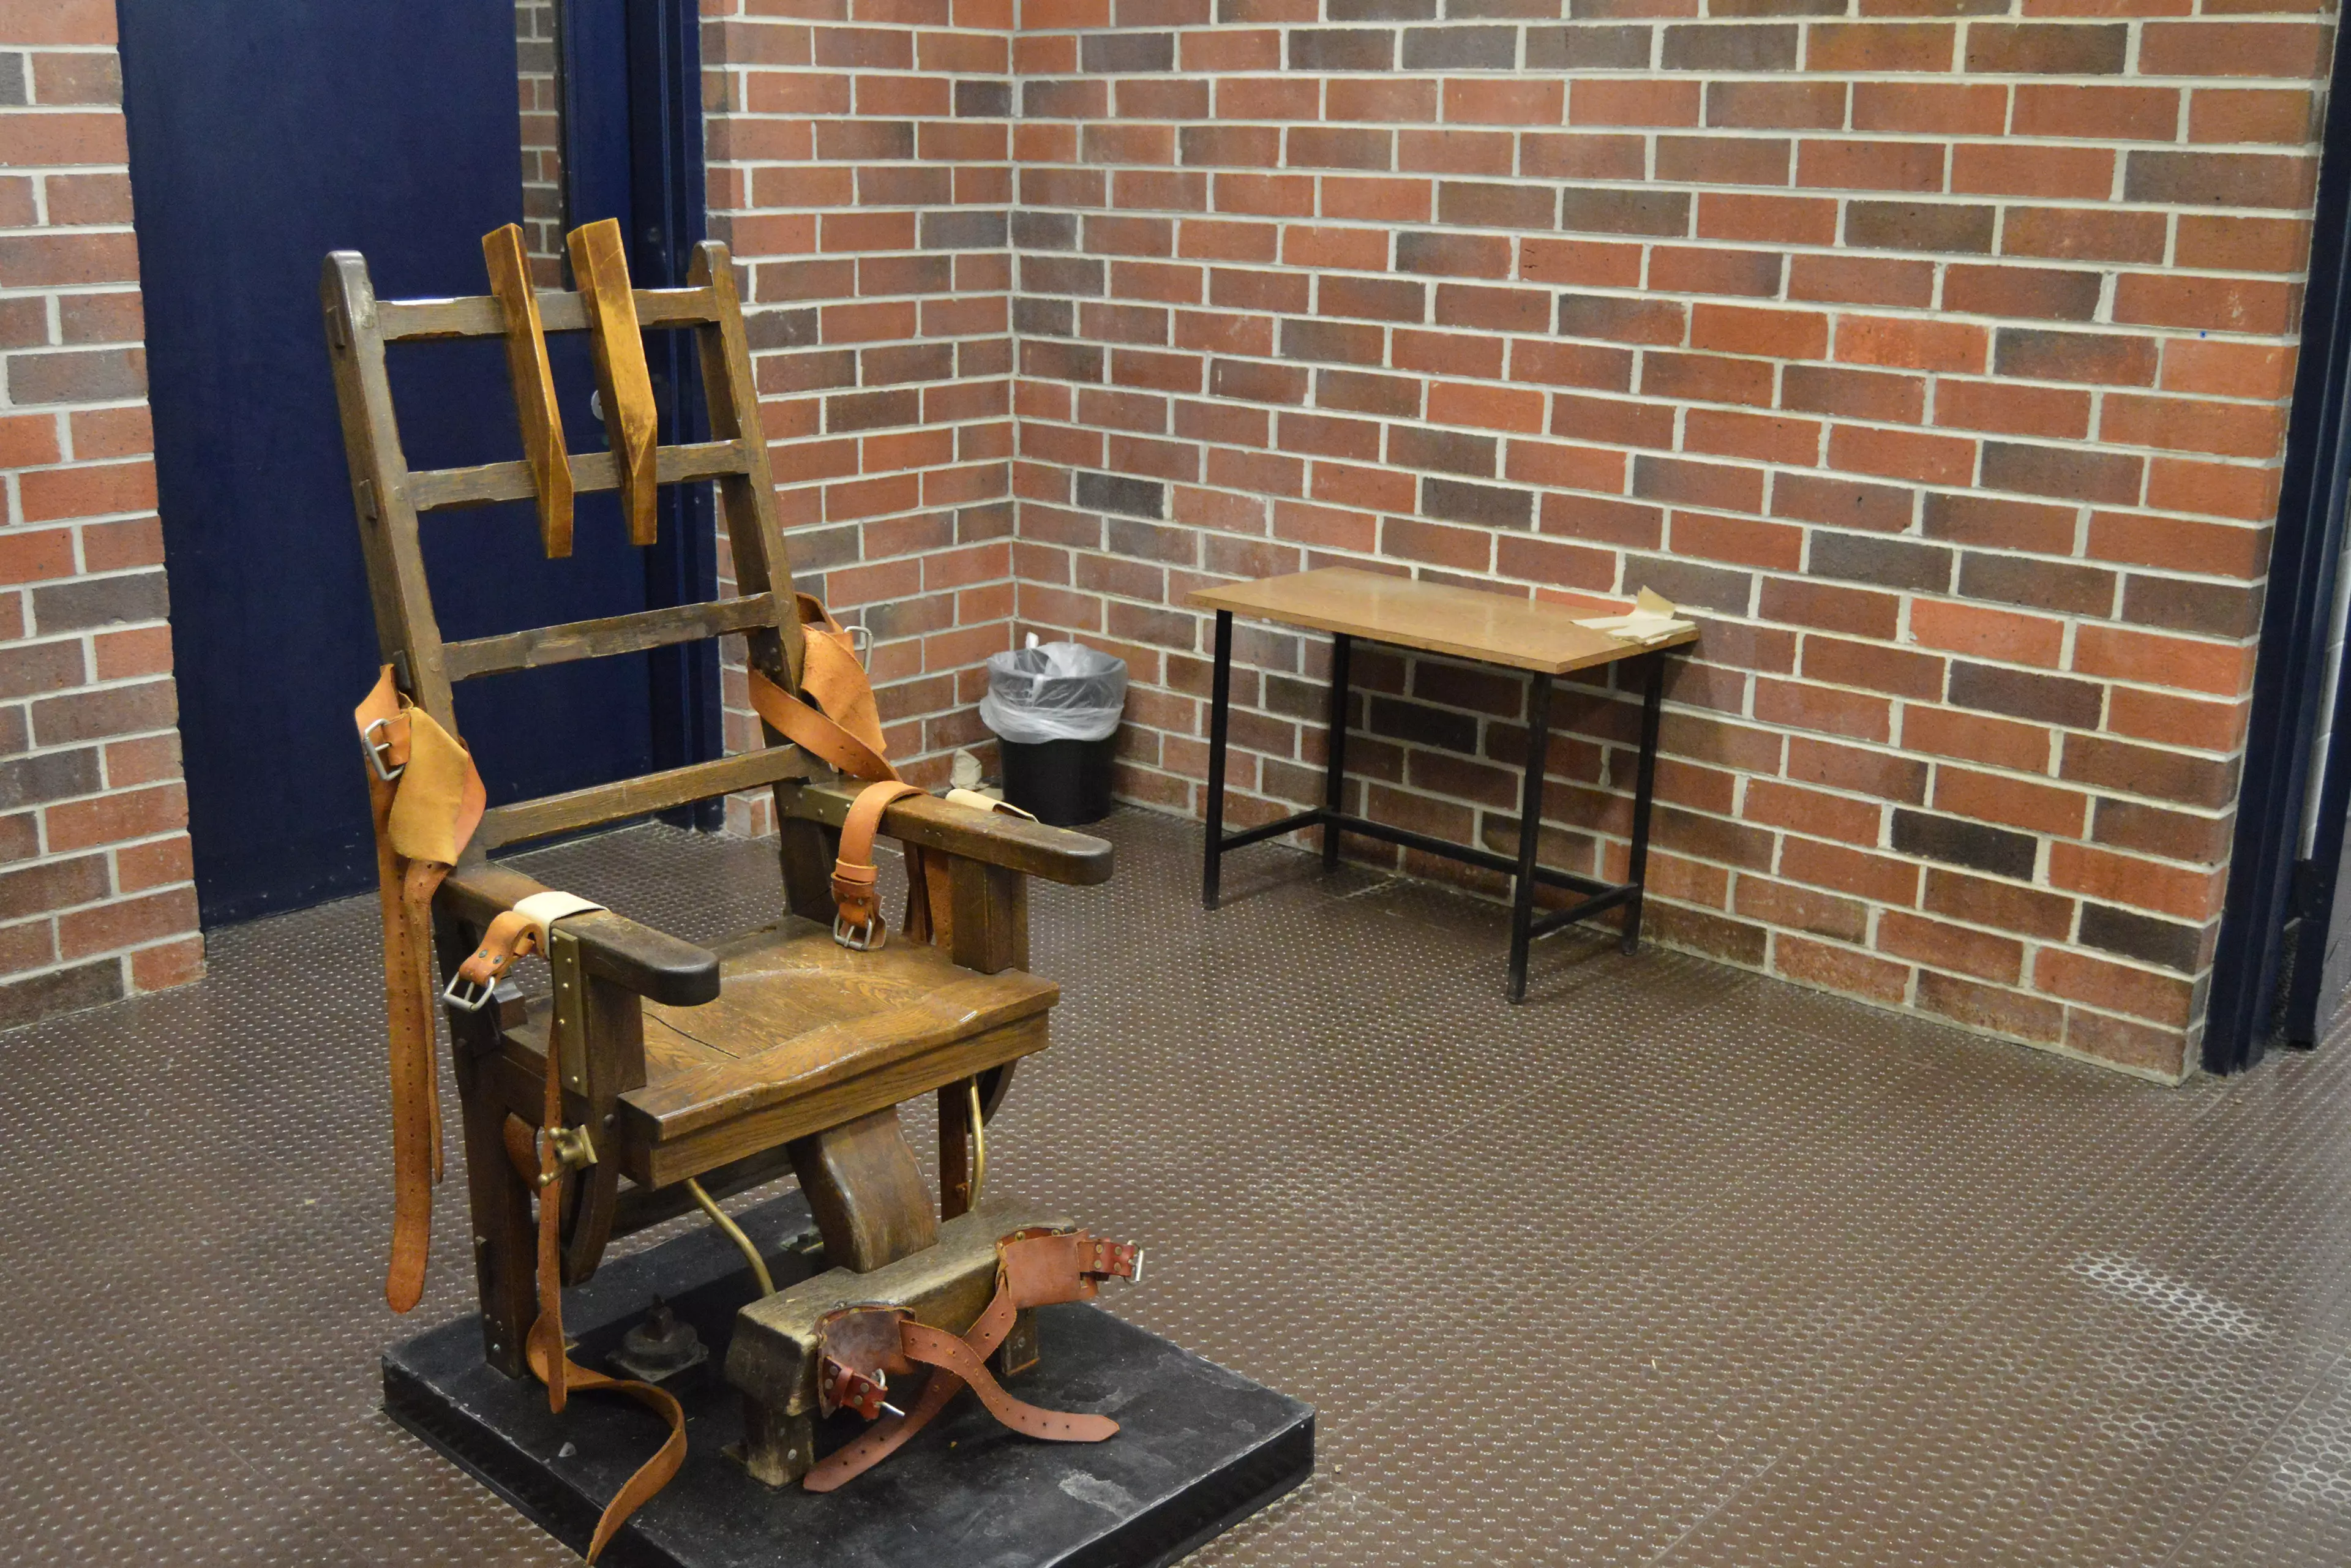 The South Carolina Department of Corrections electric chair.